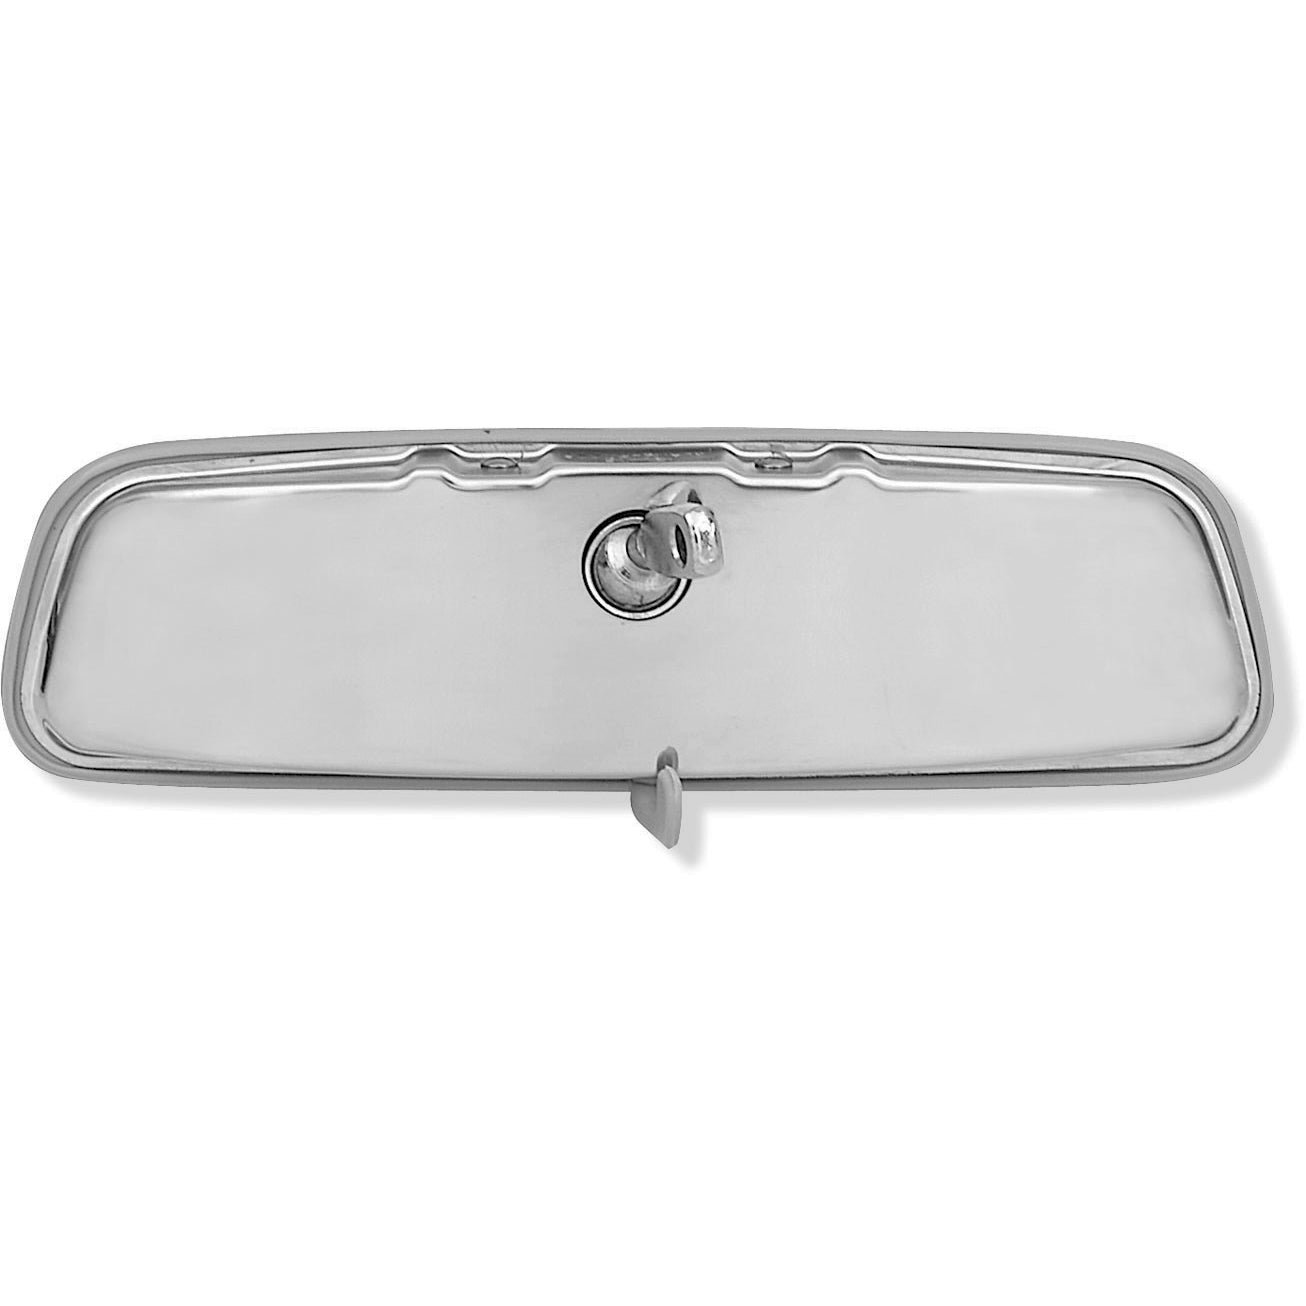 62/67 GM 8" CHROME BACKED REAR VIEW MIRROR